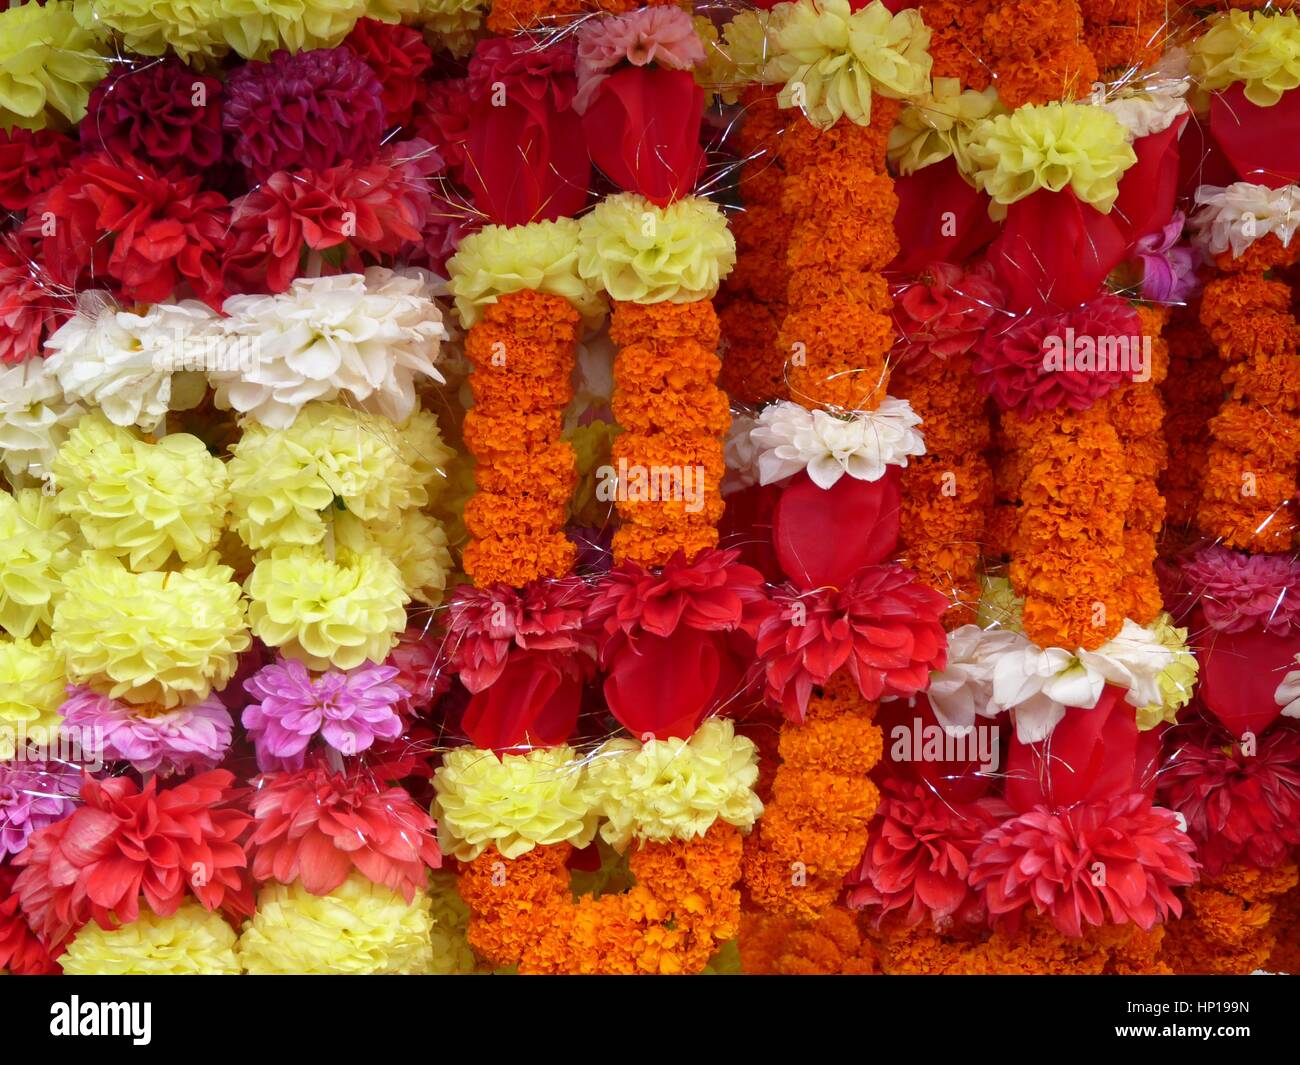 Religious offerings of strings of marigold and similar flowers left by ...